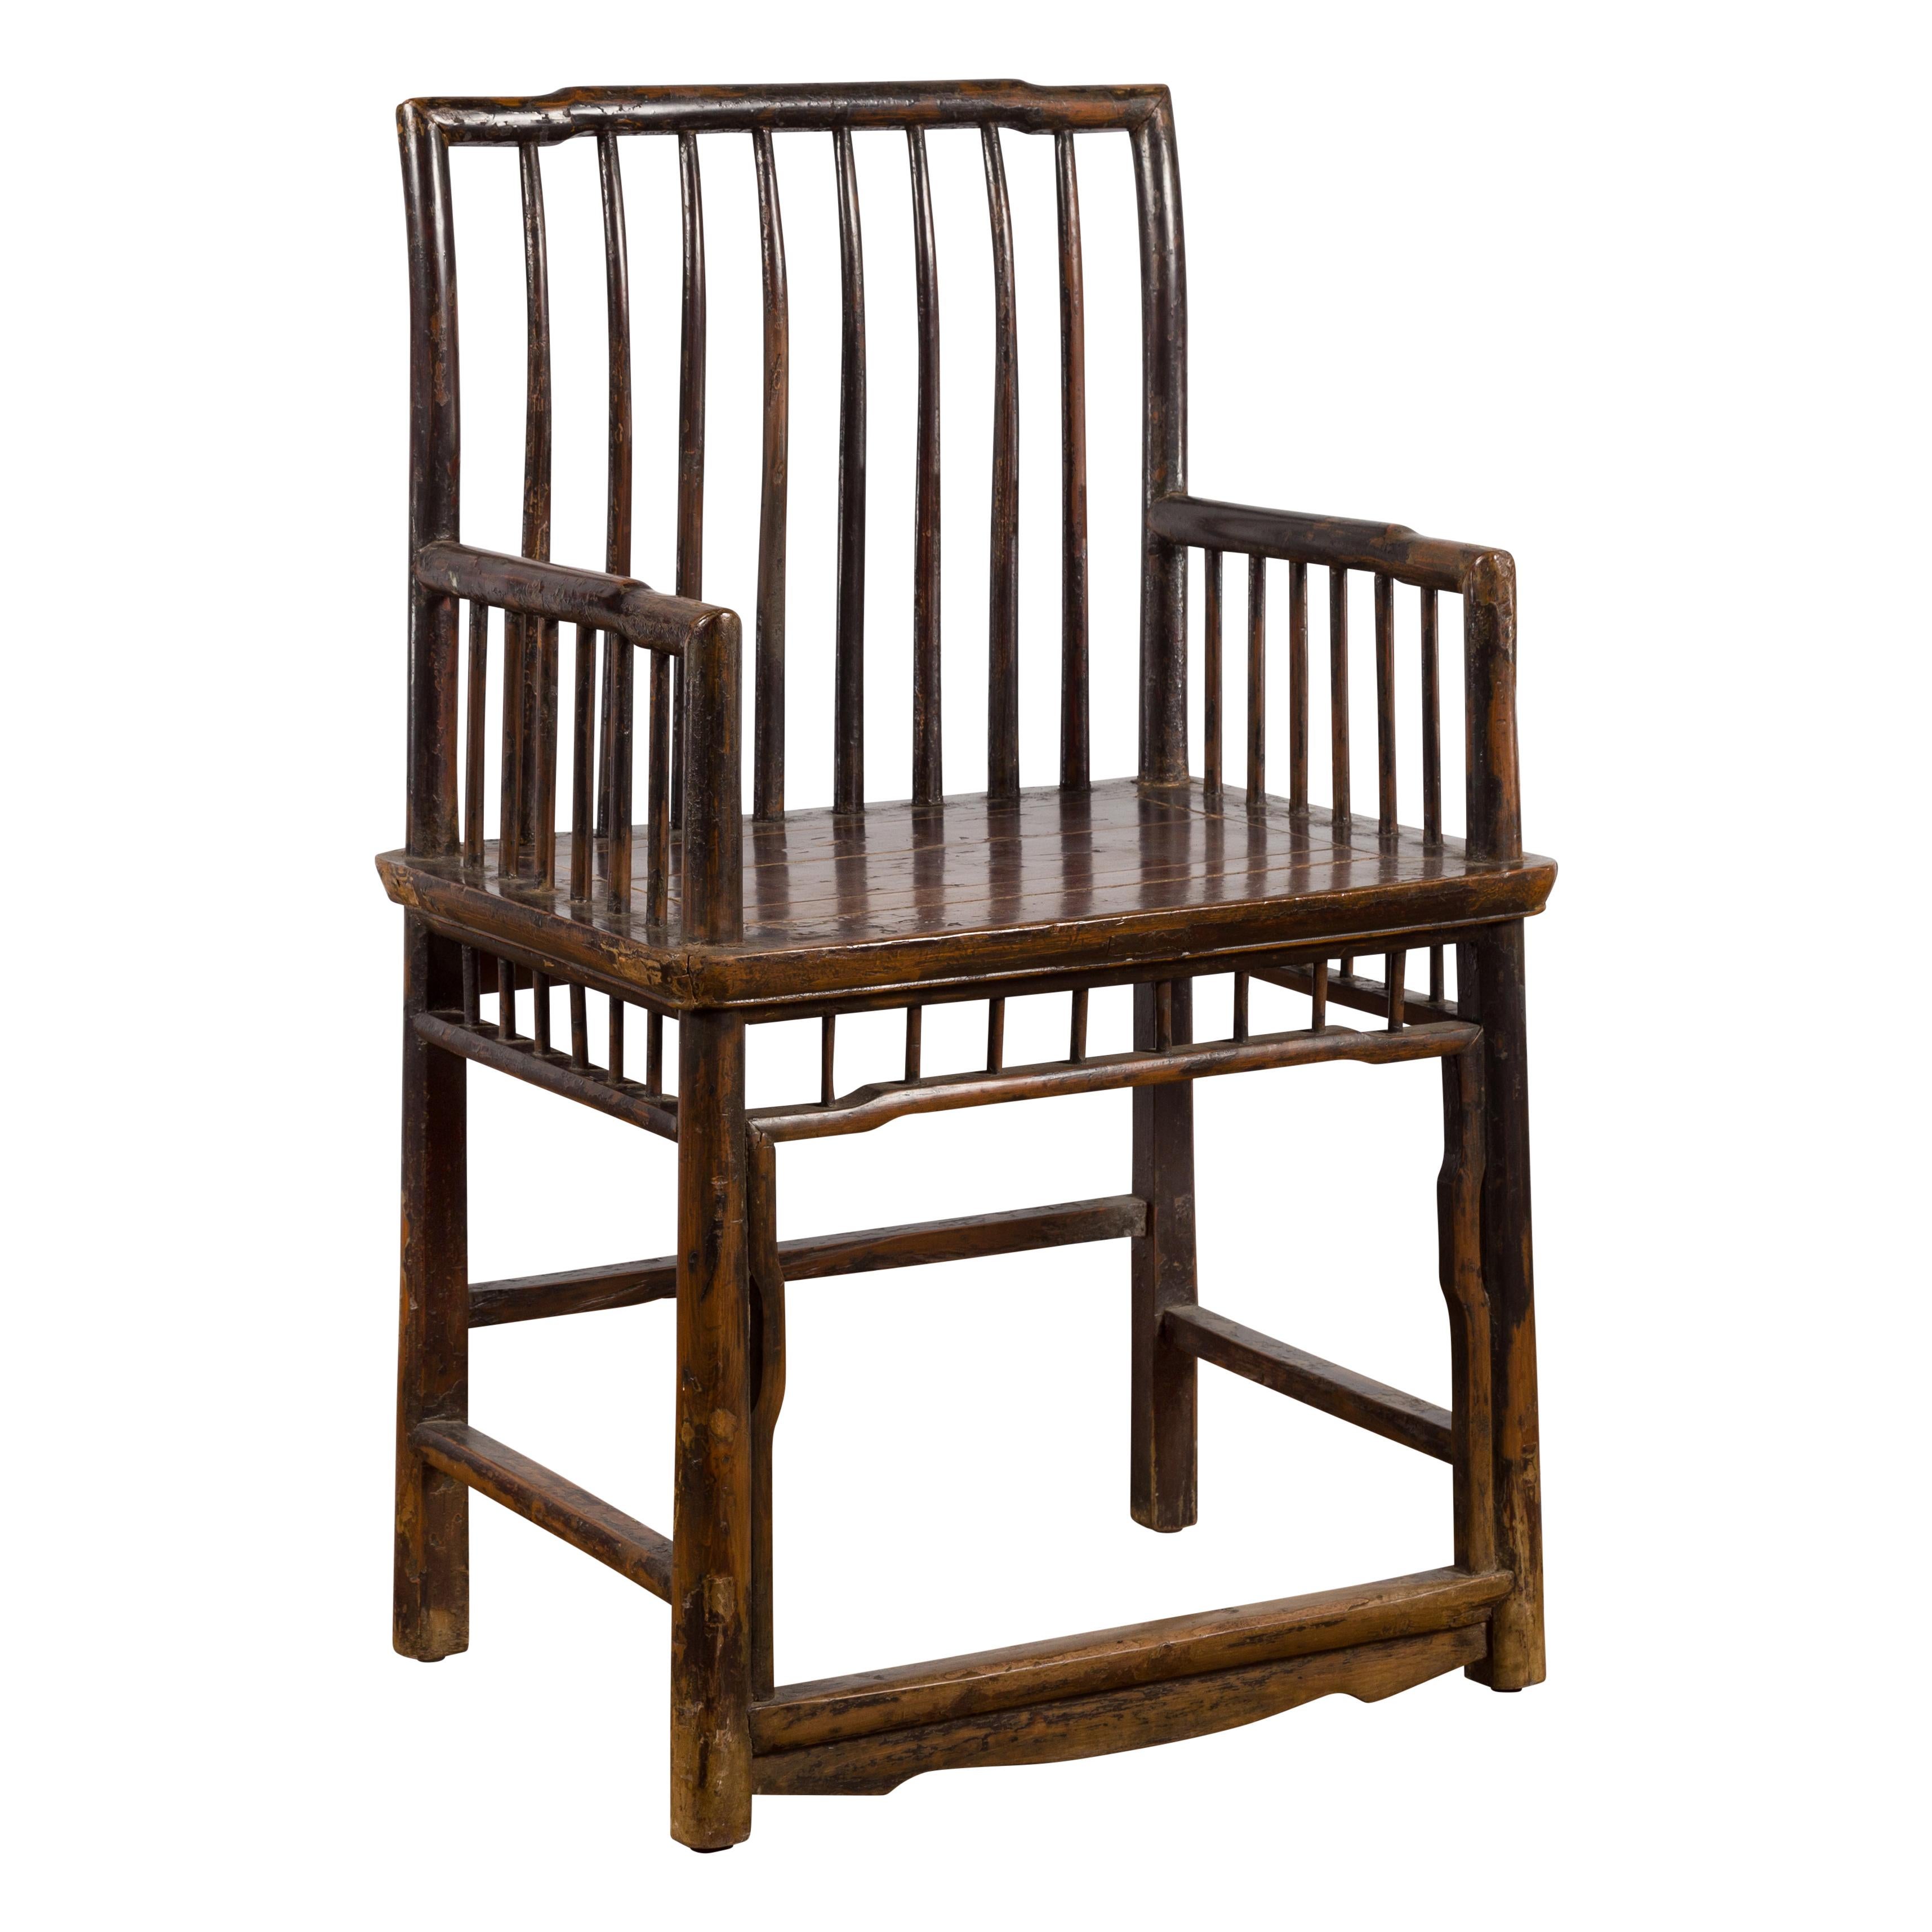 A Chinese Qing Dynasty elmwood armchair from the 19th century with slatted back and arms. Created in China during the Qing Dynasty, this elmwood chair features a pierced slatted back connected to two arms of similar style flanking a central wooden